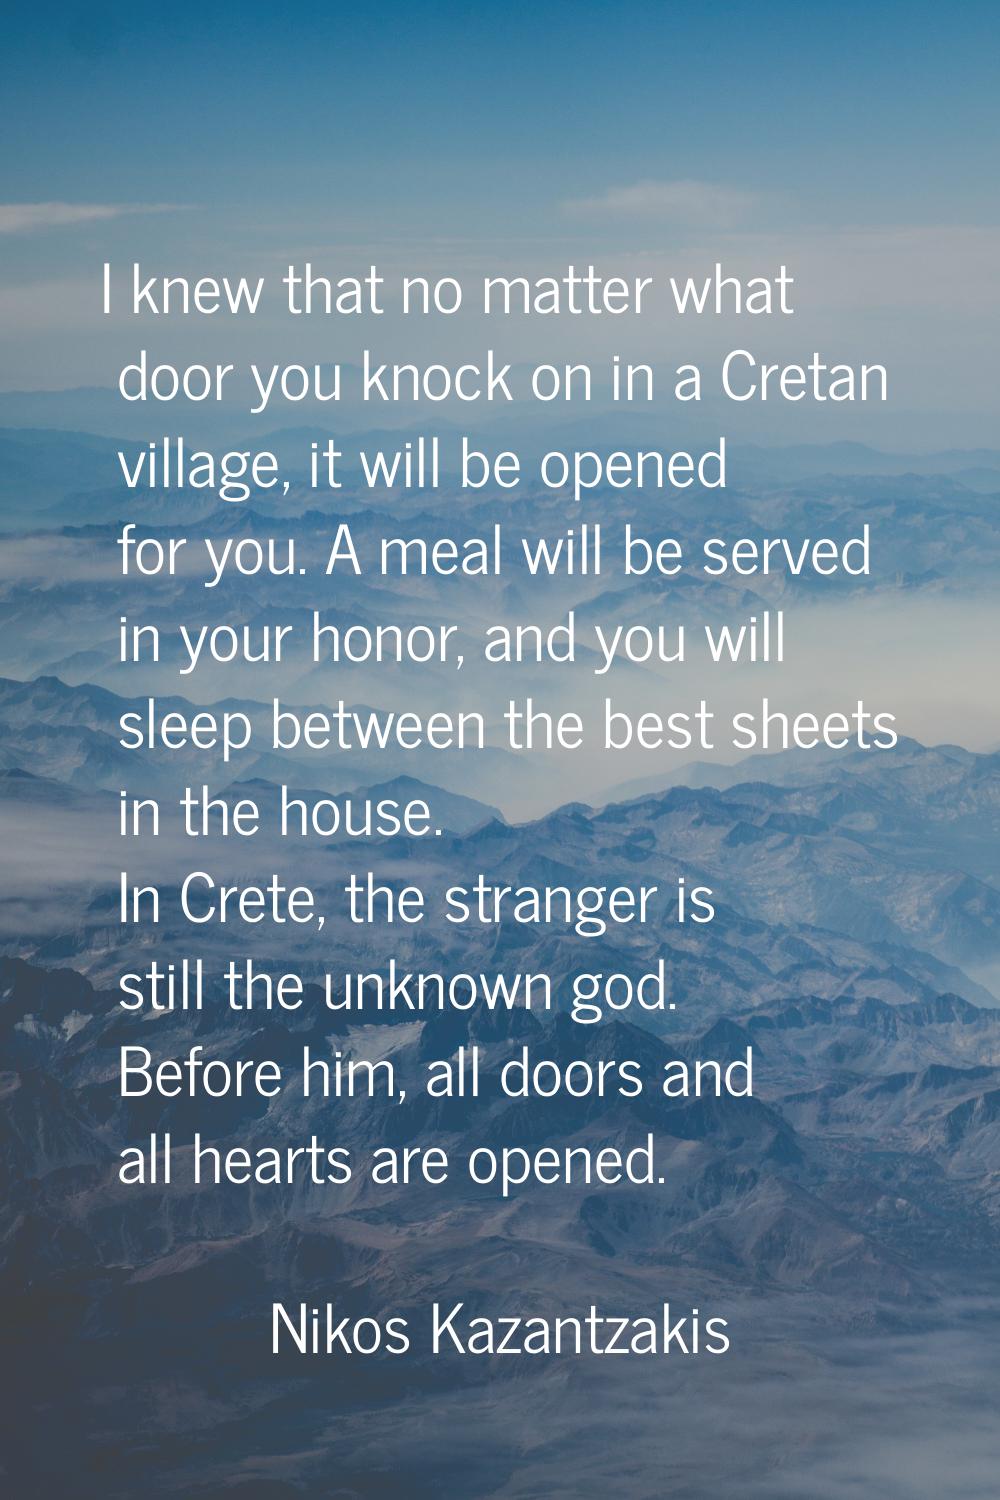 I knew that no matter what door you knock on in a Cretan village, it will be opened for you. A meal